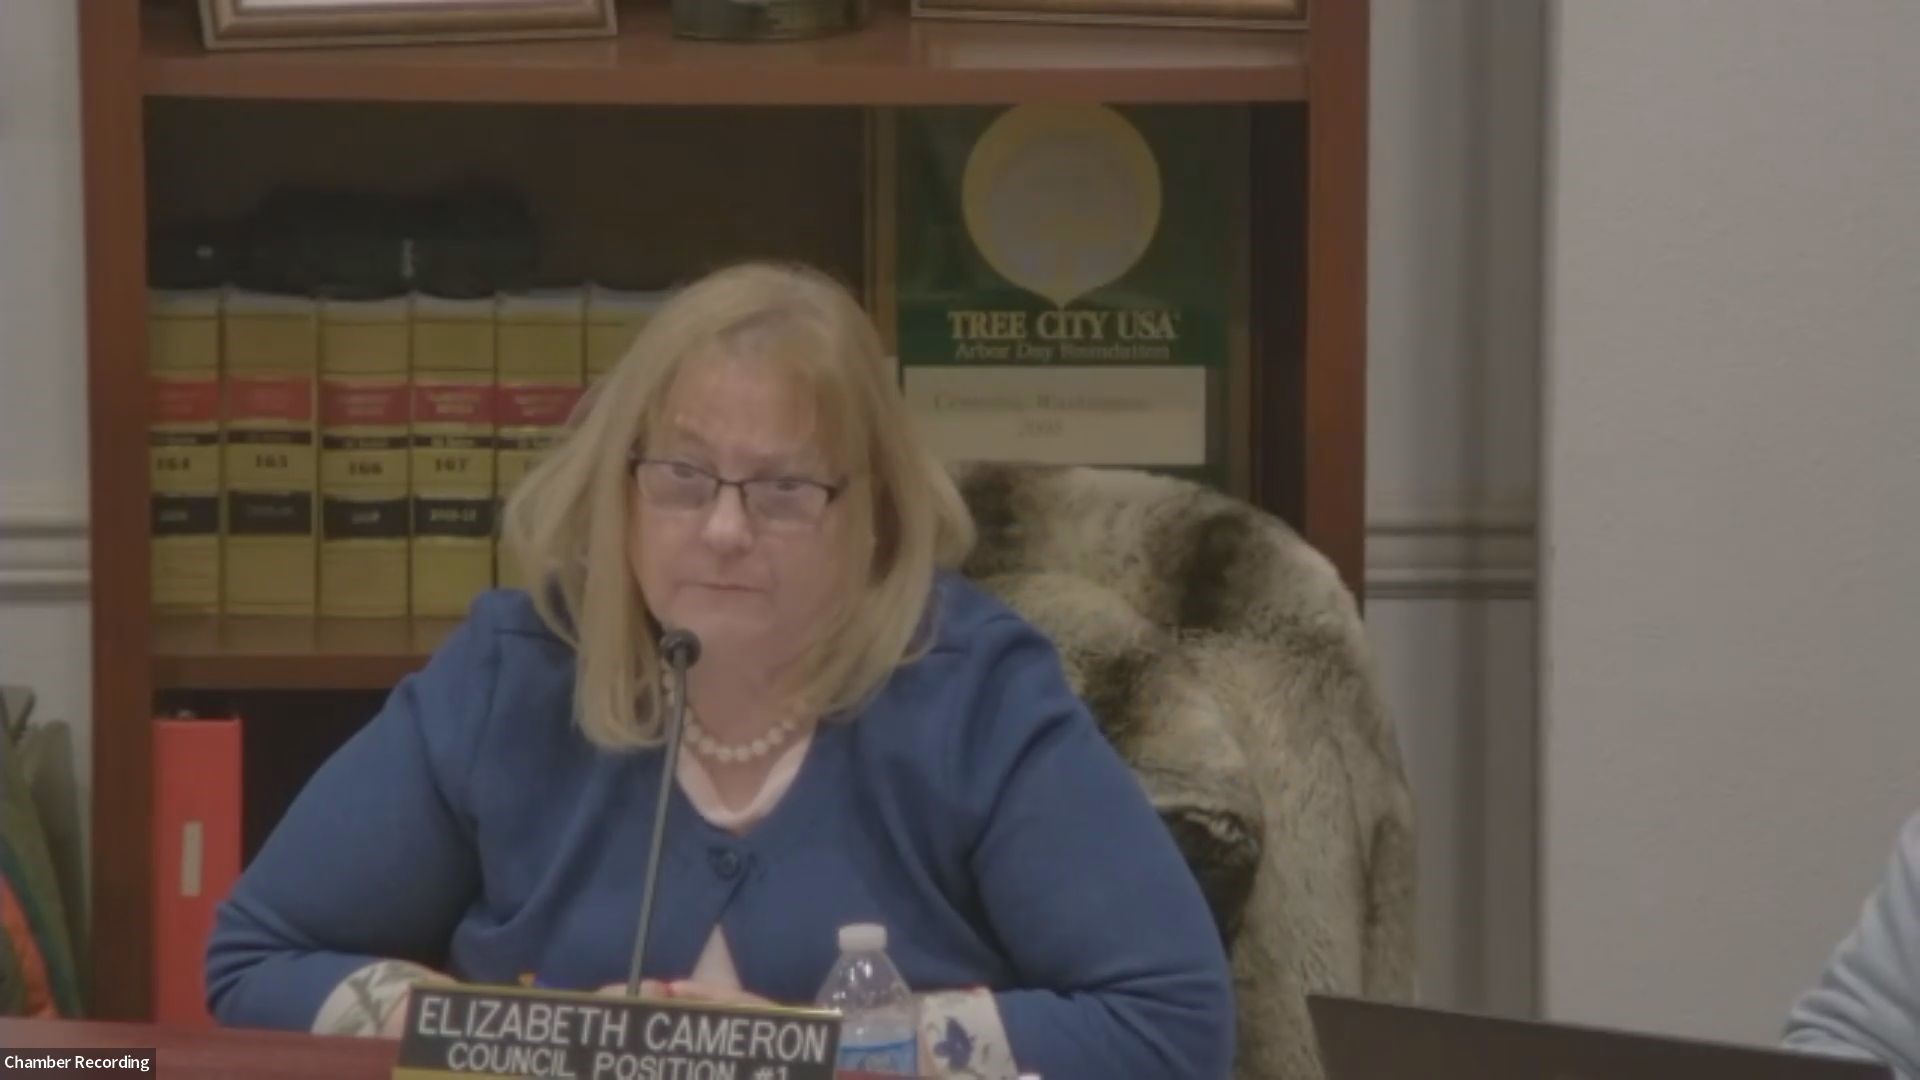 Centralia City Councilmember Elizabeth Cameron first defends a controversial religion, then disavows white supremacy in a subsequent statement.